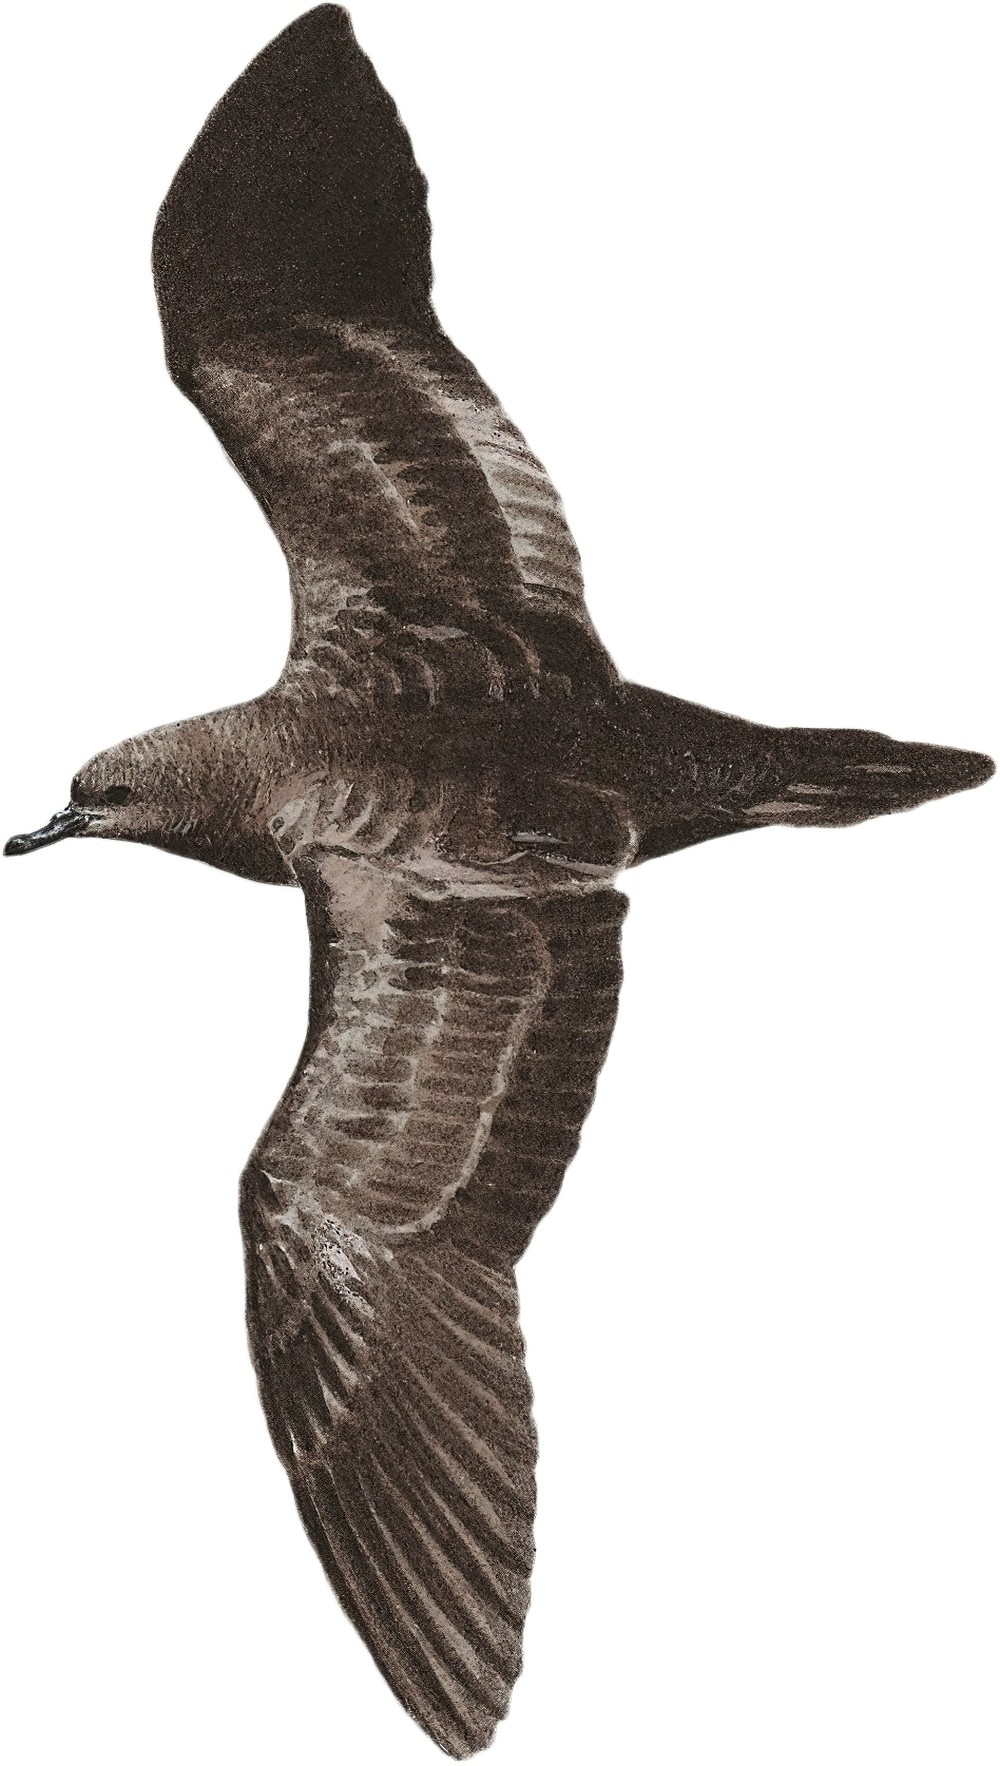 Wedge-tailed Shearwater / Ardenna pacifica